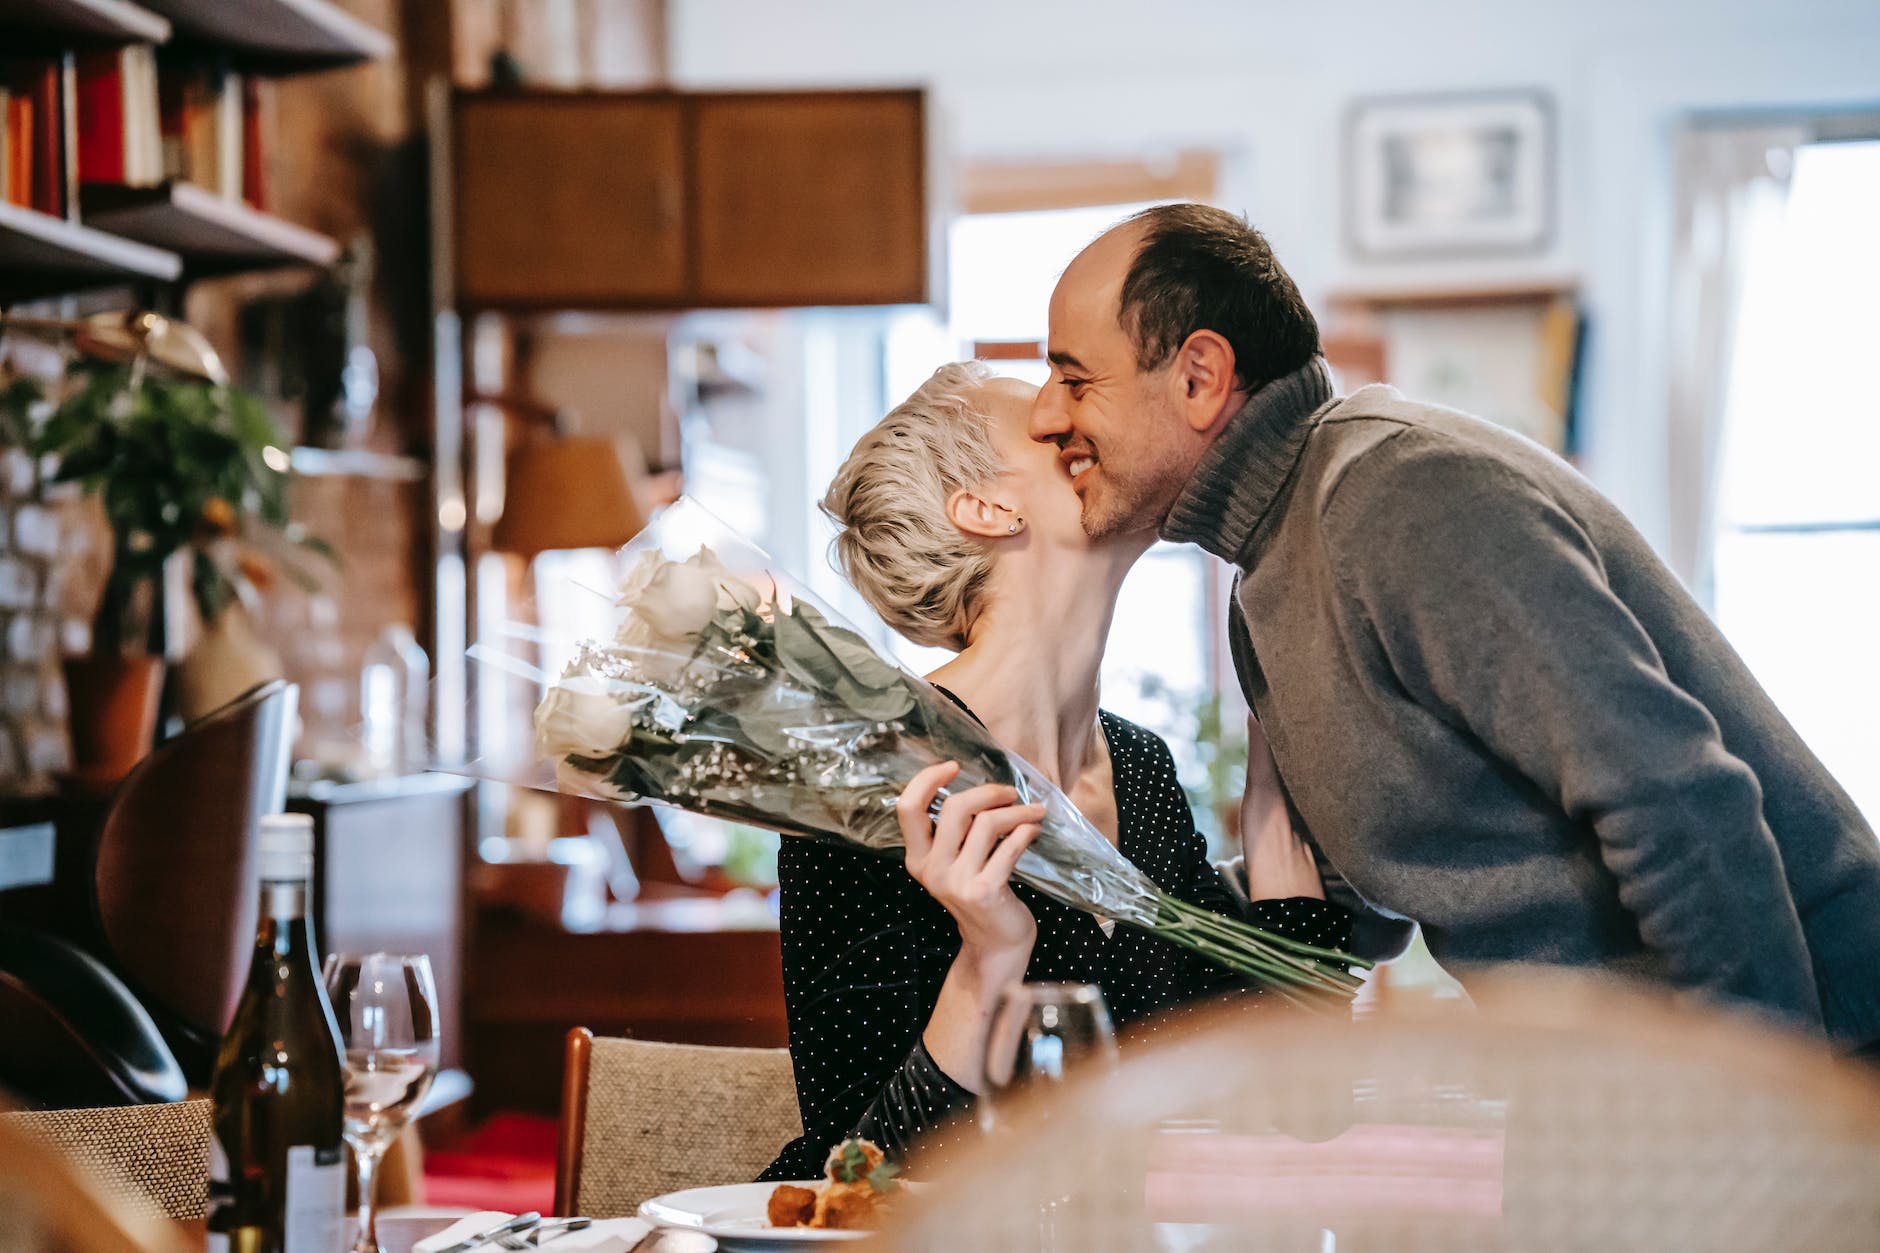 woman holding bouquet of flowers kissing a man